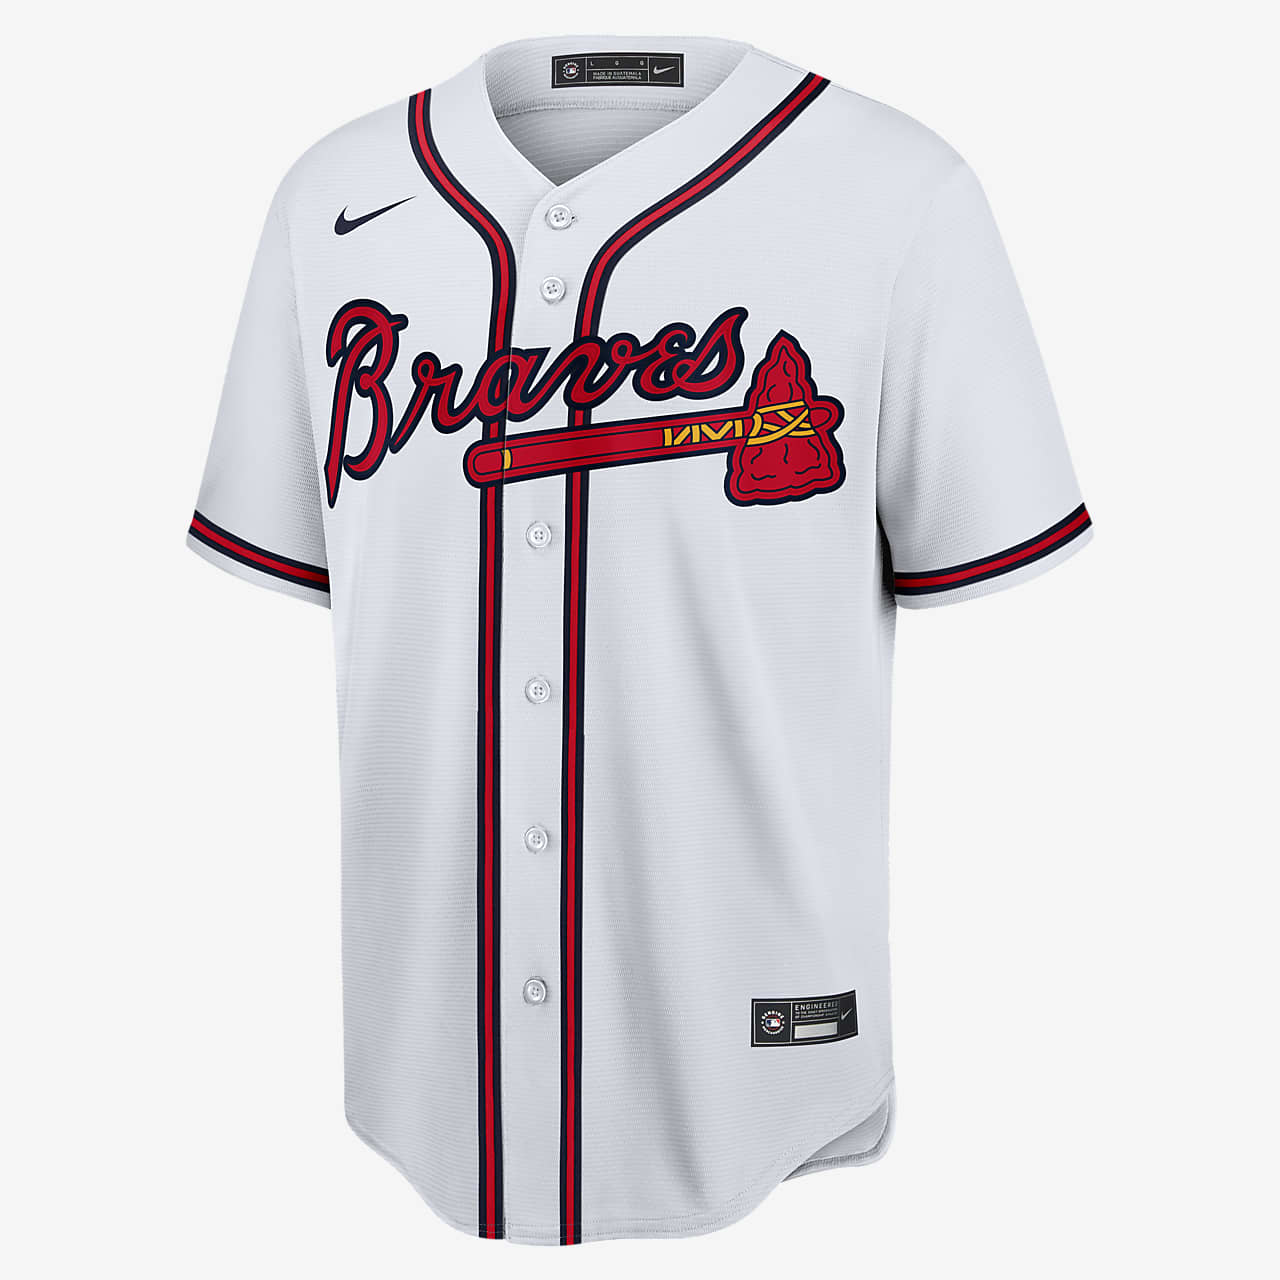 red braves jersey with stars